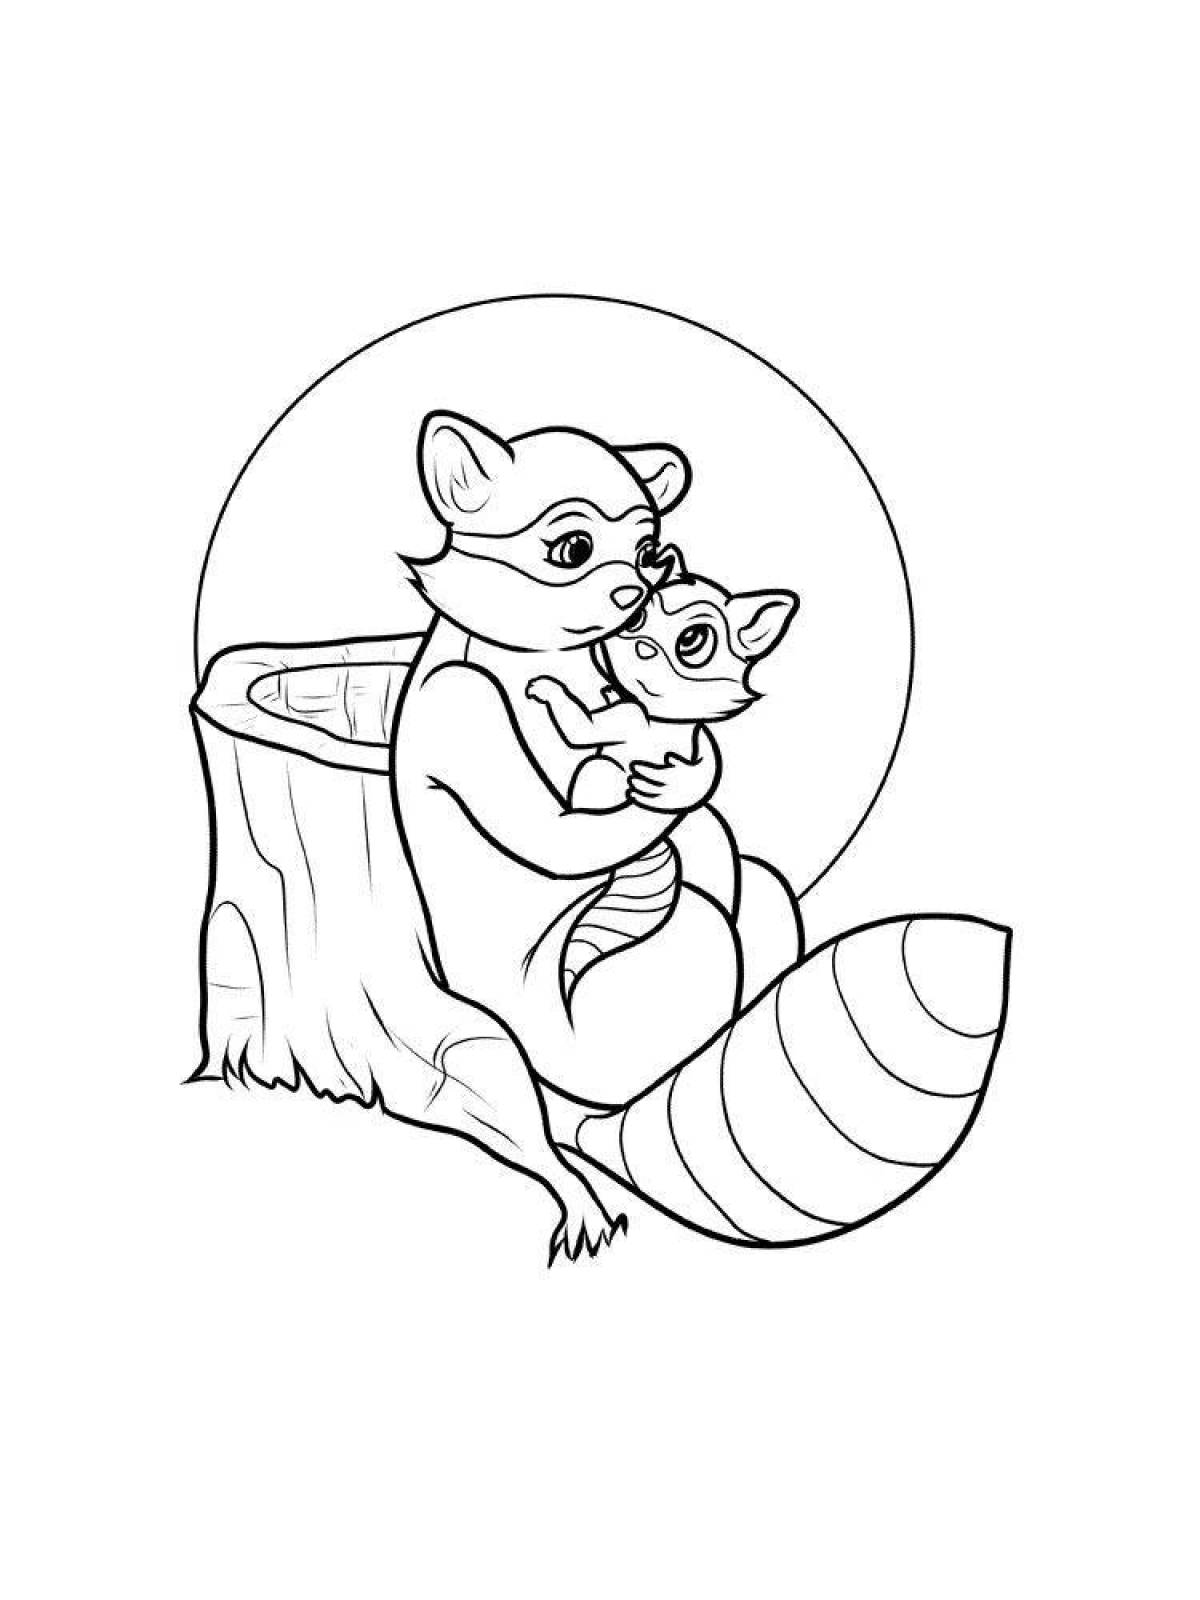 Friendly raccoon coloring book